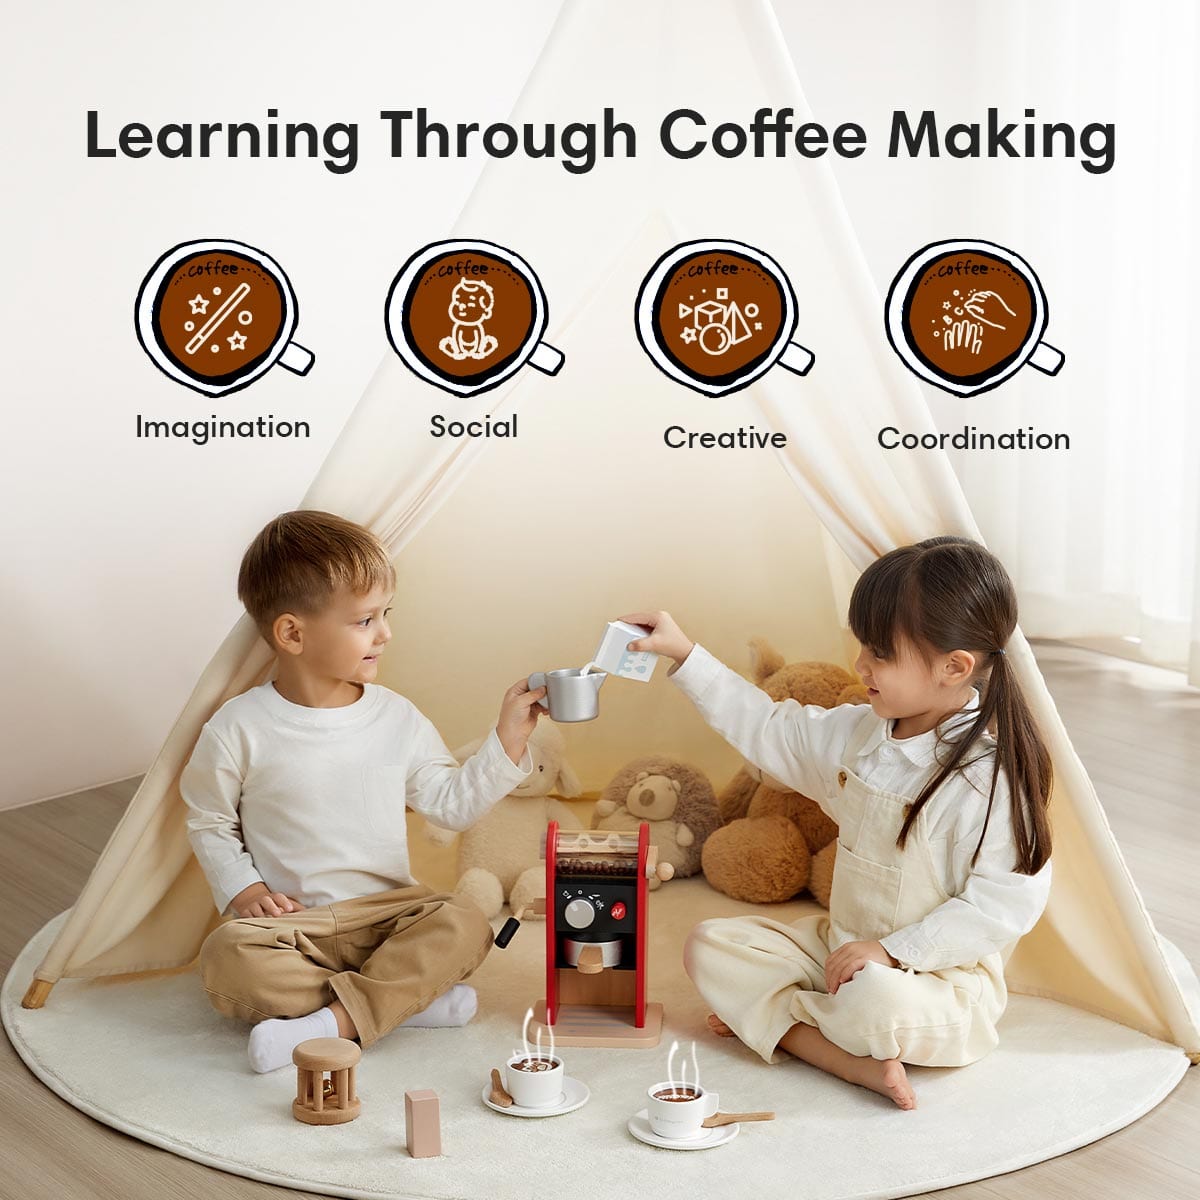 a picture of a girl and a boy are playing around the wooden coffee maker toy set.